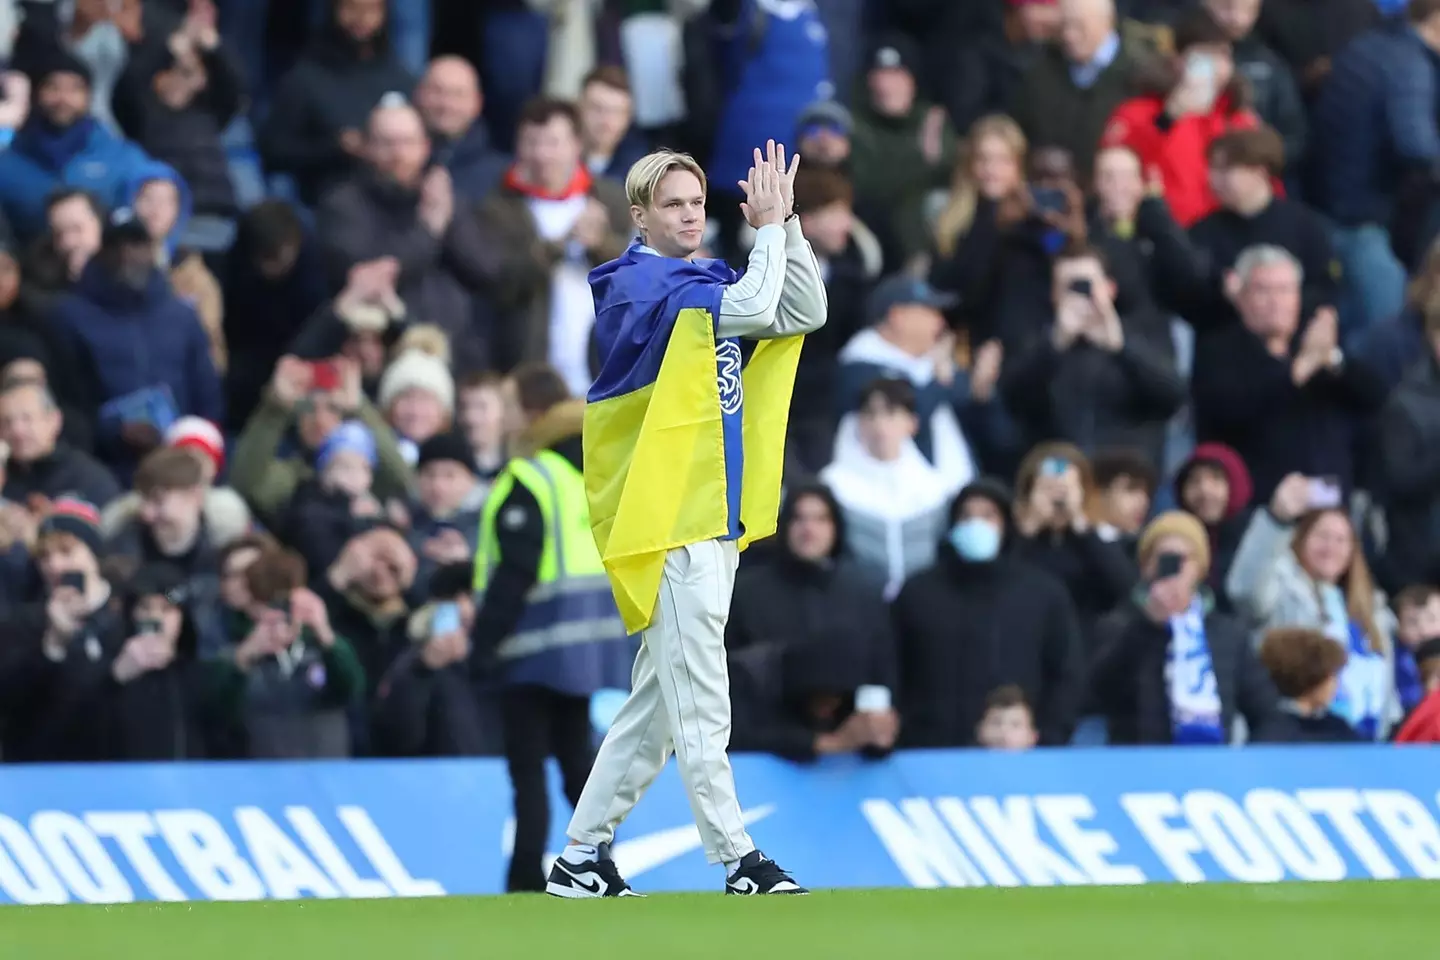 Mudryk was paraded at Chelsea during the win over Palace. Image: Alamy